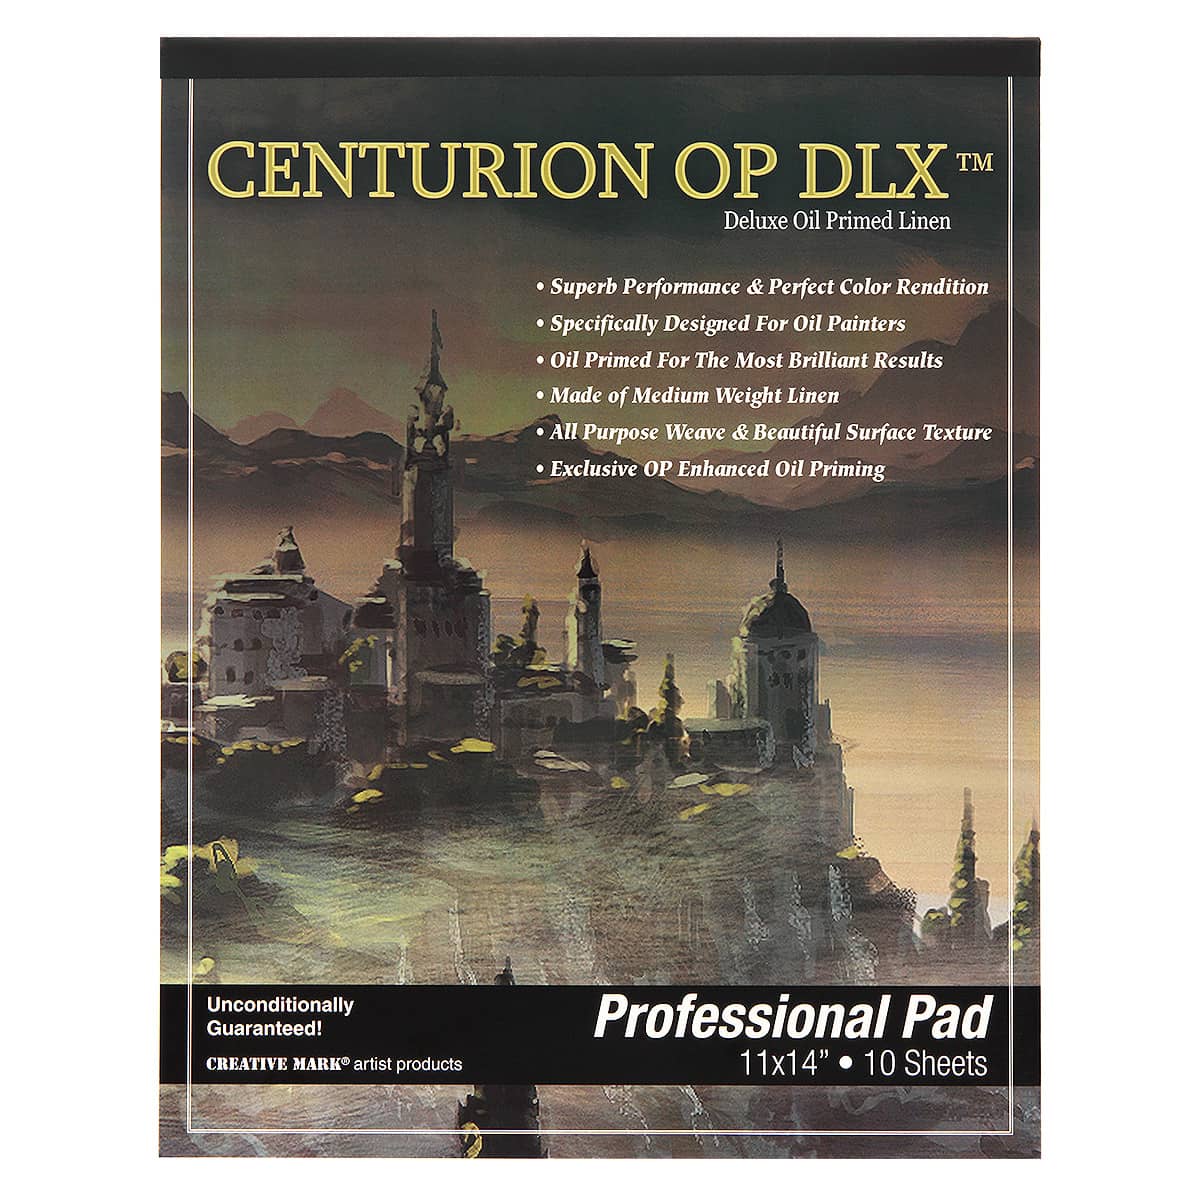 Centurion OP DLX Deluxe Professional Oil Primed Pad - 11x14" 